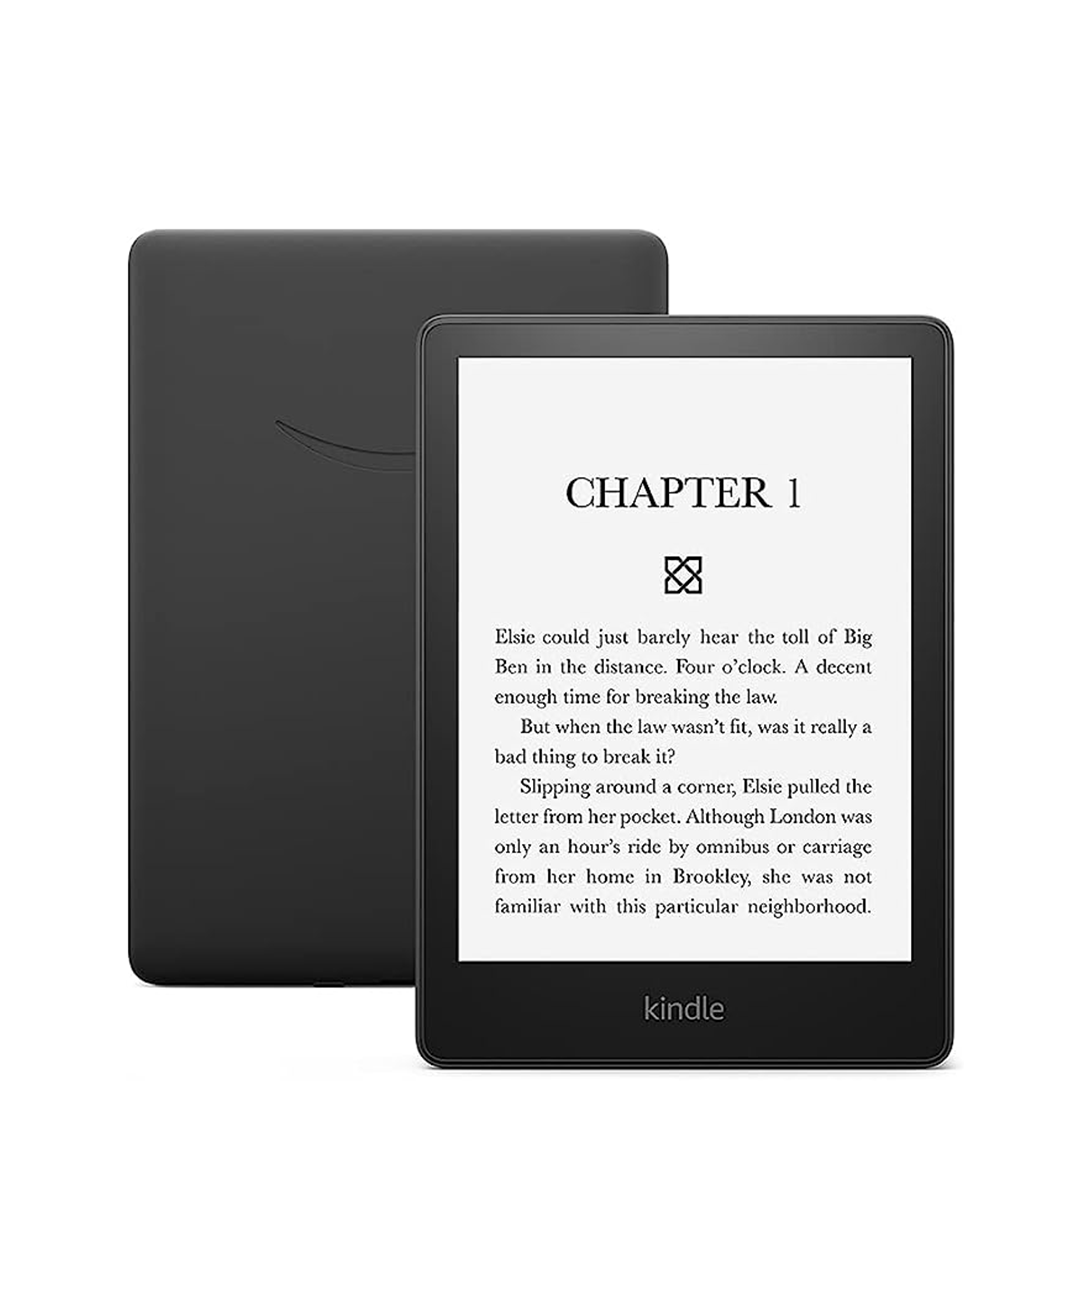  Kindle Paperwhite Signature Edition Essentials Bundle including  Kindle Paperwhite Signature Edition (32 GB), Fabric Cover - Black, and  Wireless Charging Dock